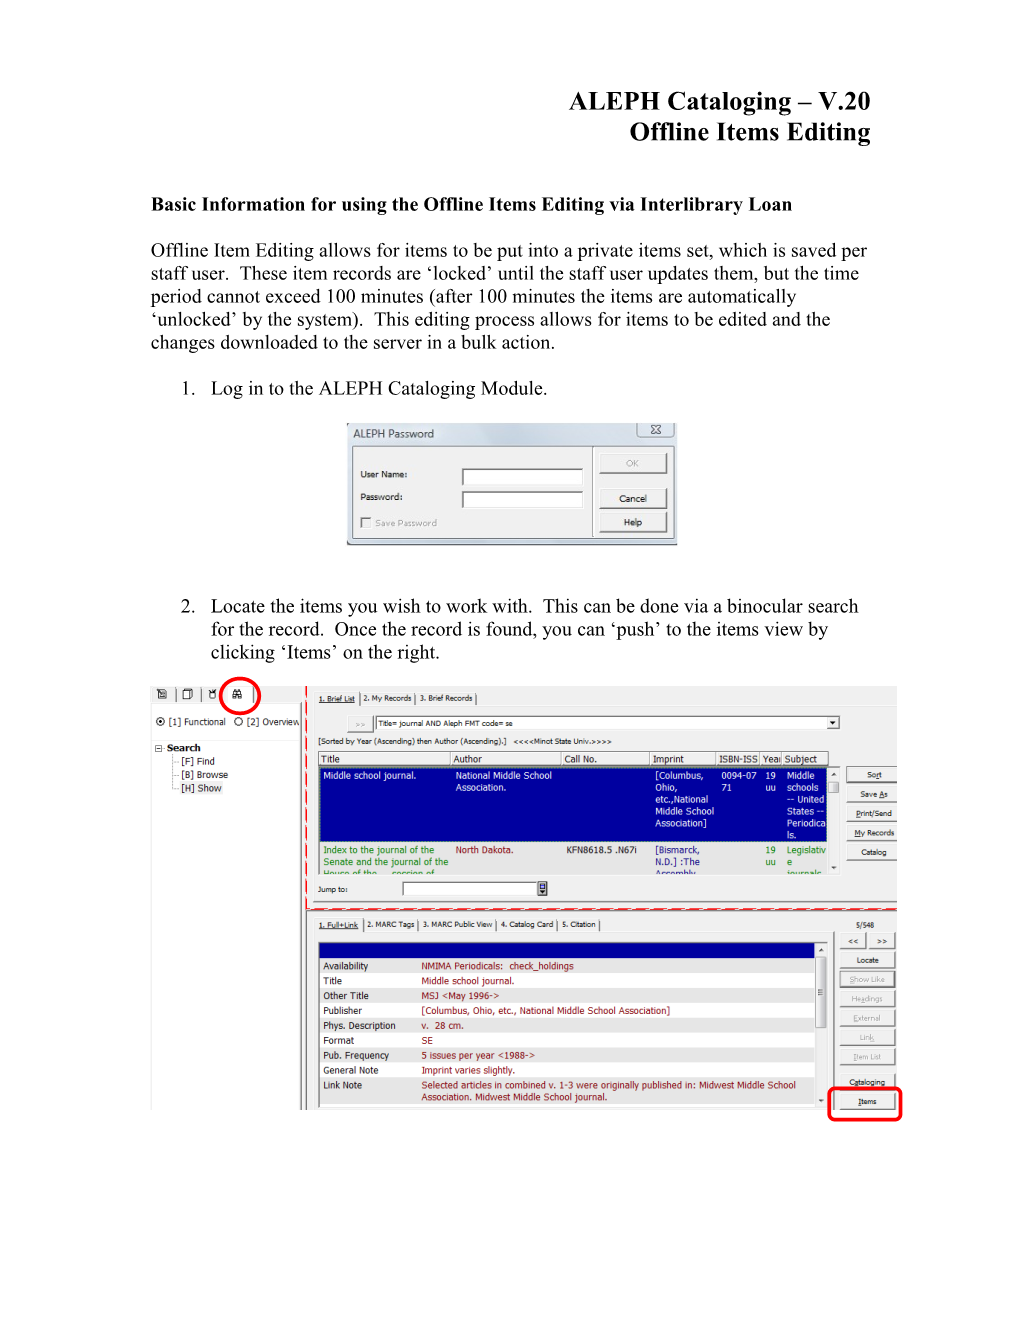 Basic Information for Using the Offline Items Editing Via Interlibrary Loan